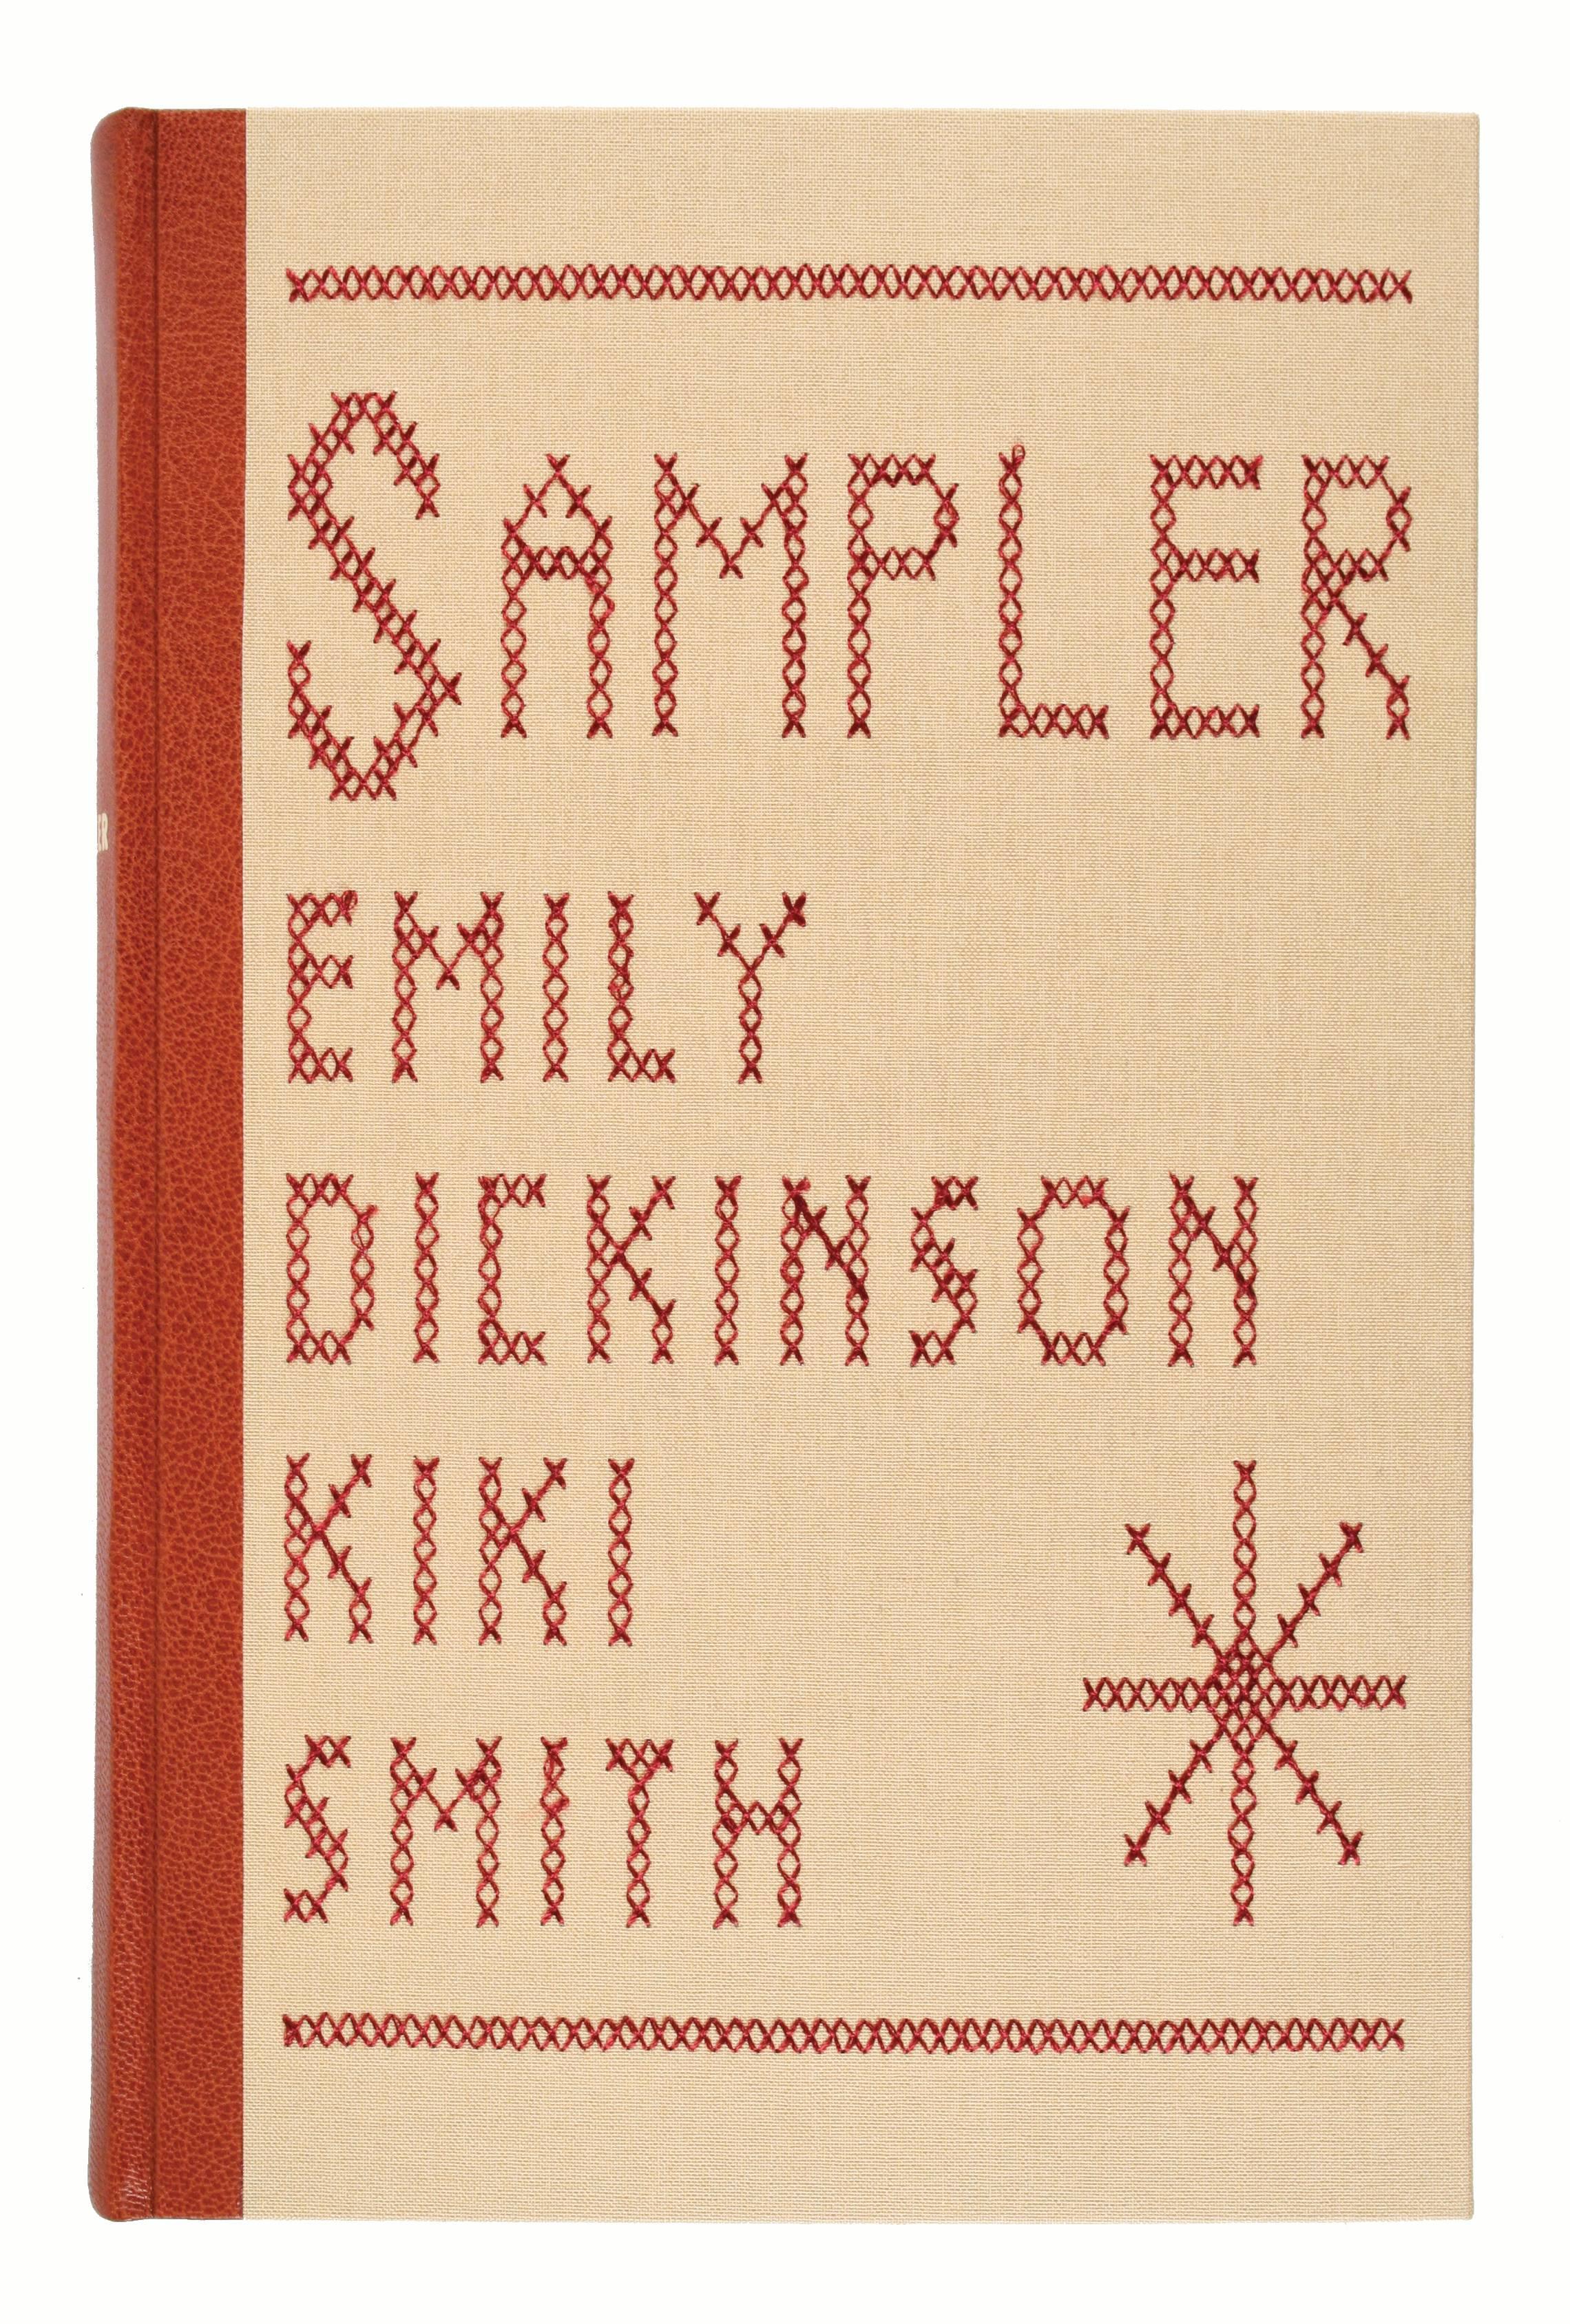 SMITH, Kiki. Sampler. By Emily Dickinson. 220 pp.  8vo., bound in publisher's red-brown goatskin spine, tan cloth sides, with the front cover embroidered in red thread for title and author and artist names in a slipcase.  San Francisco: Arion Press,